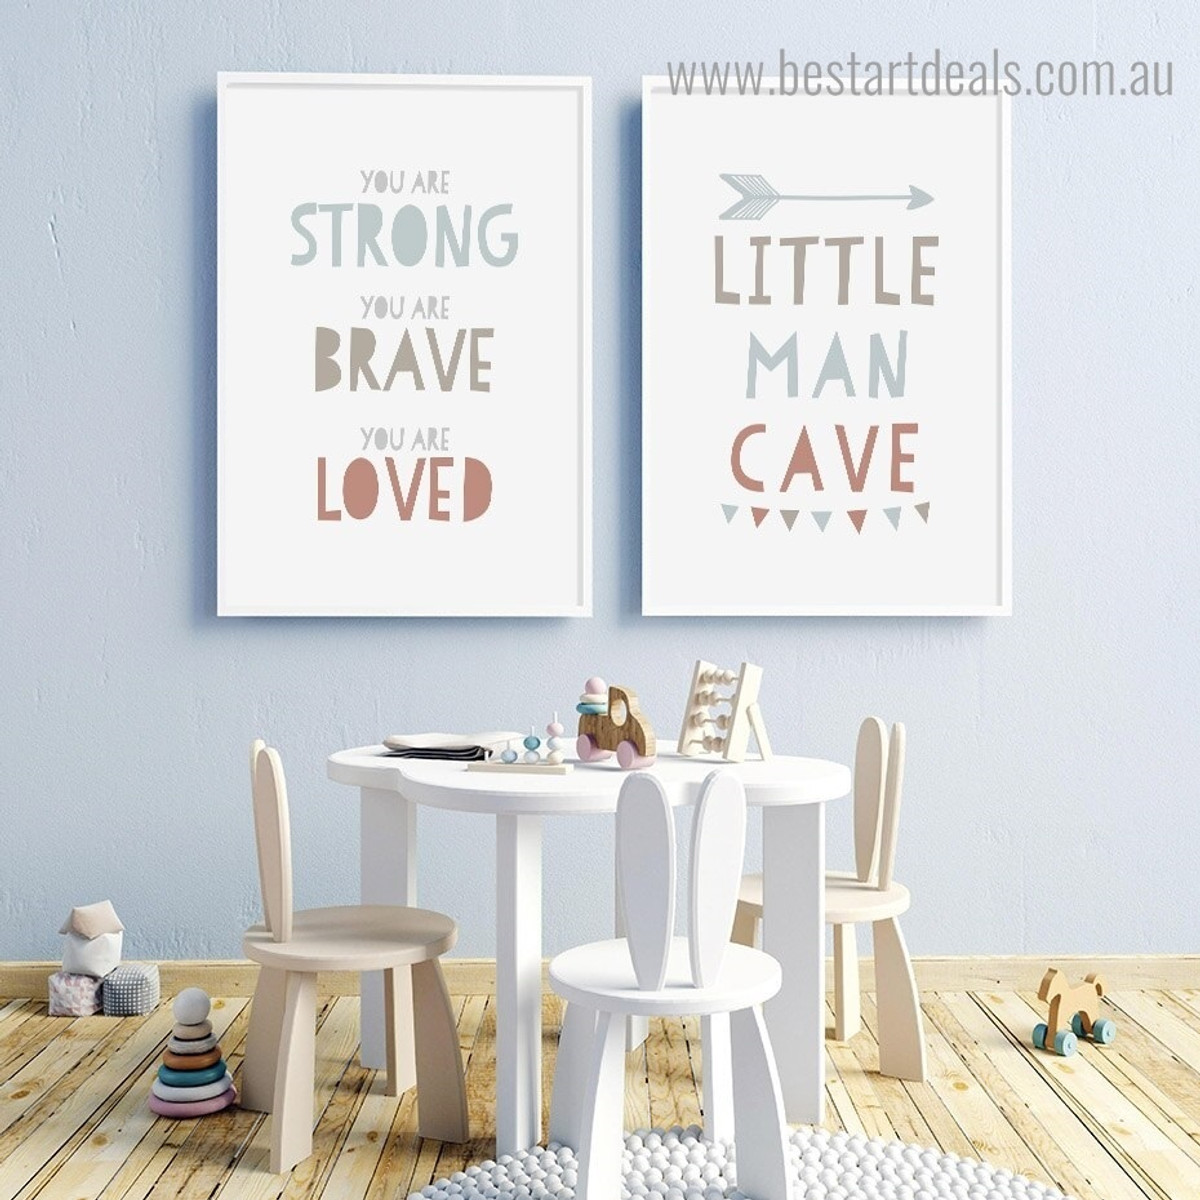 You are Brave Kids Quote Framed Painting Photo Canvas Print for Room Wall Decoration